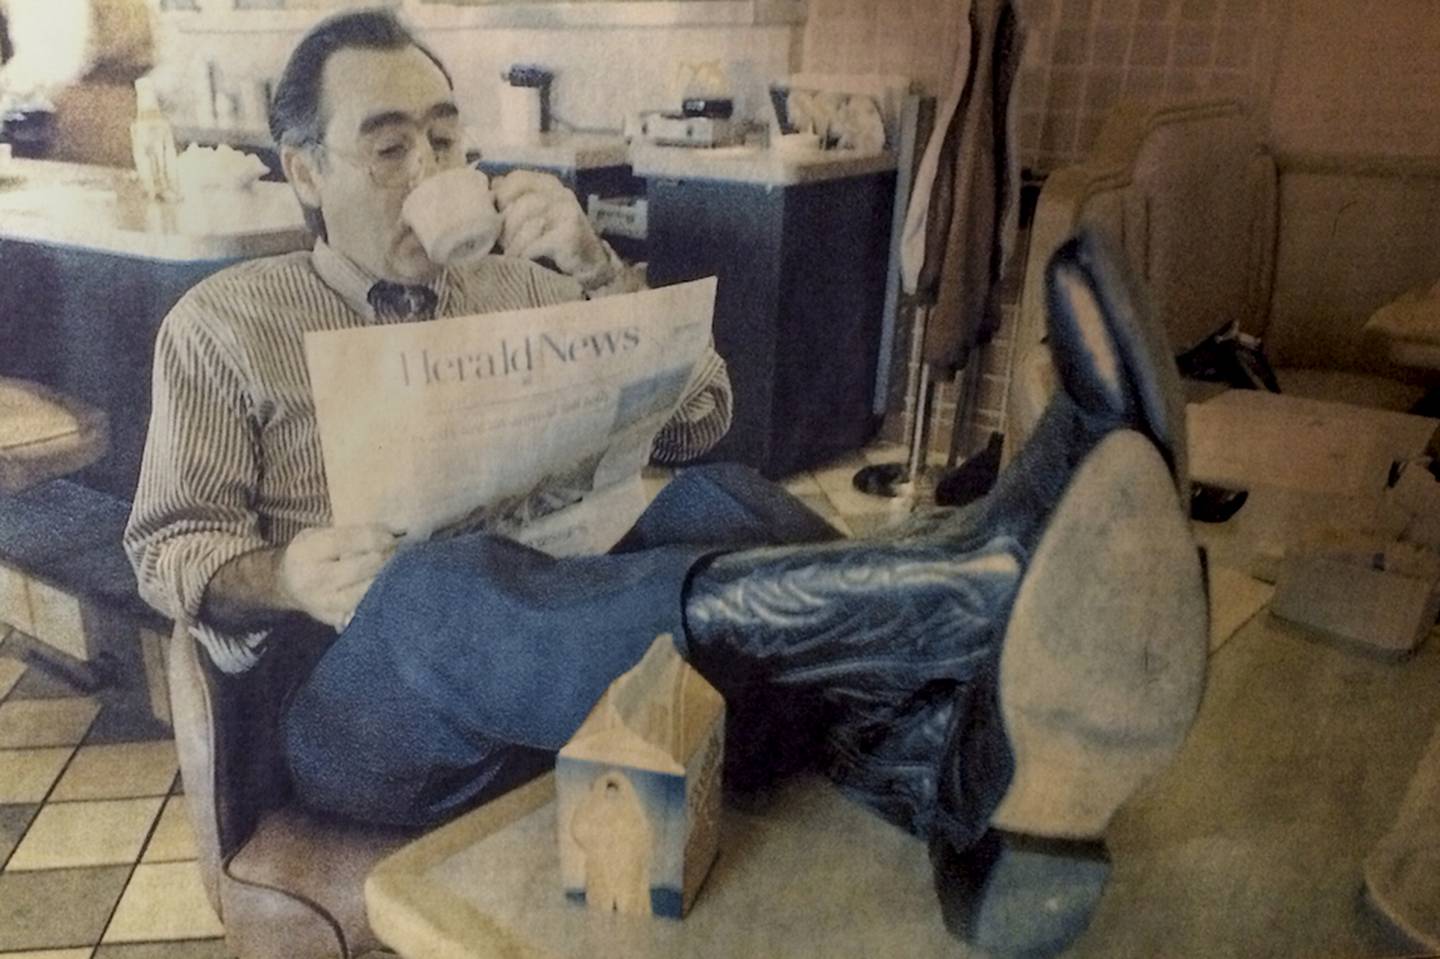 An old newspaper photo of Herald-News reporter John Whiteside. Writing stories and columns for the paper for 34 years, Whiteside frequently preferred to work at Joliet restaurants.